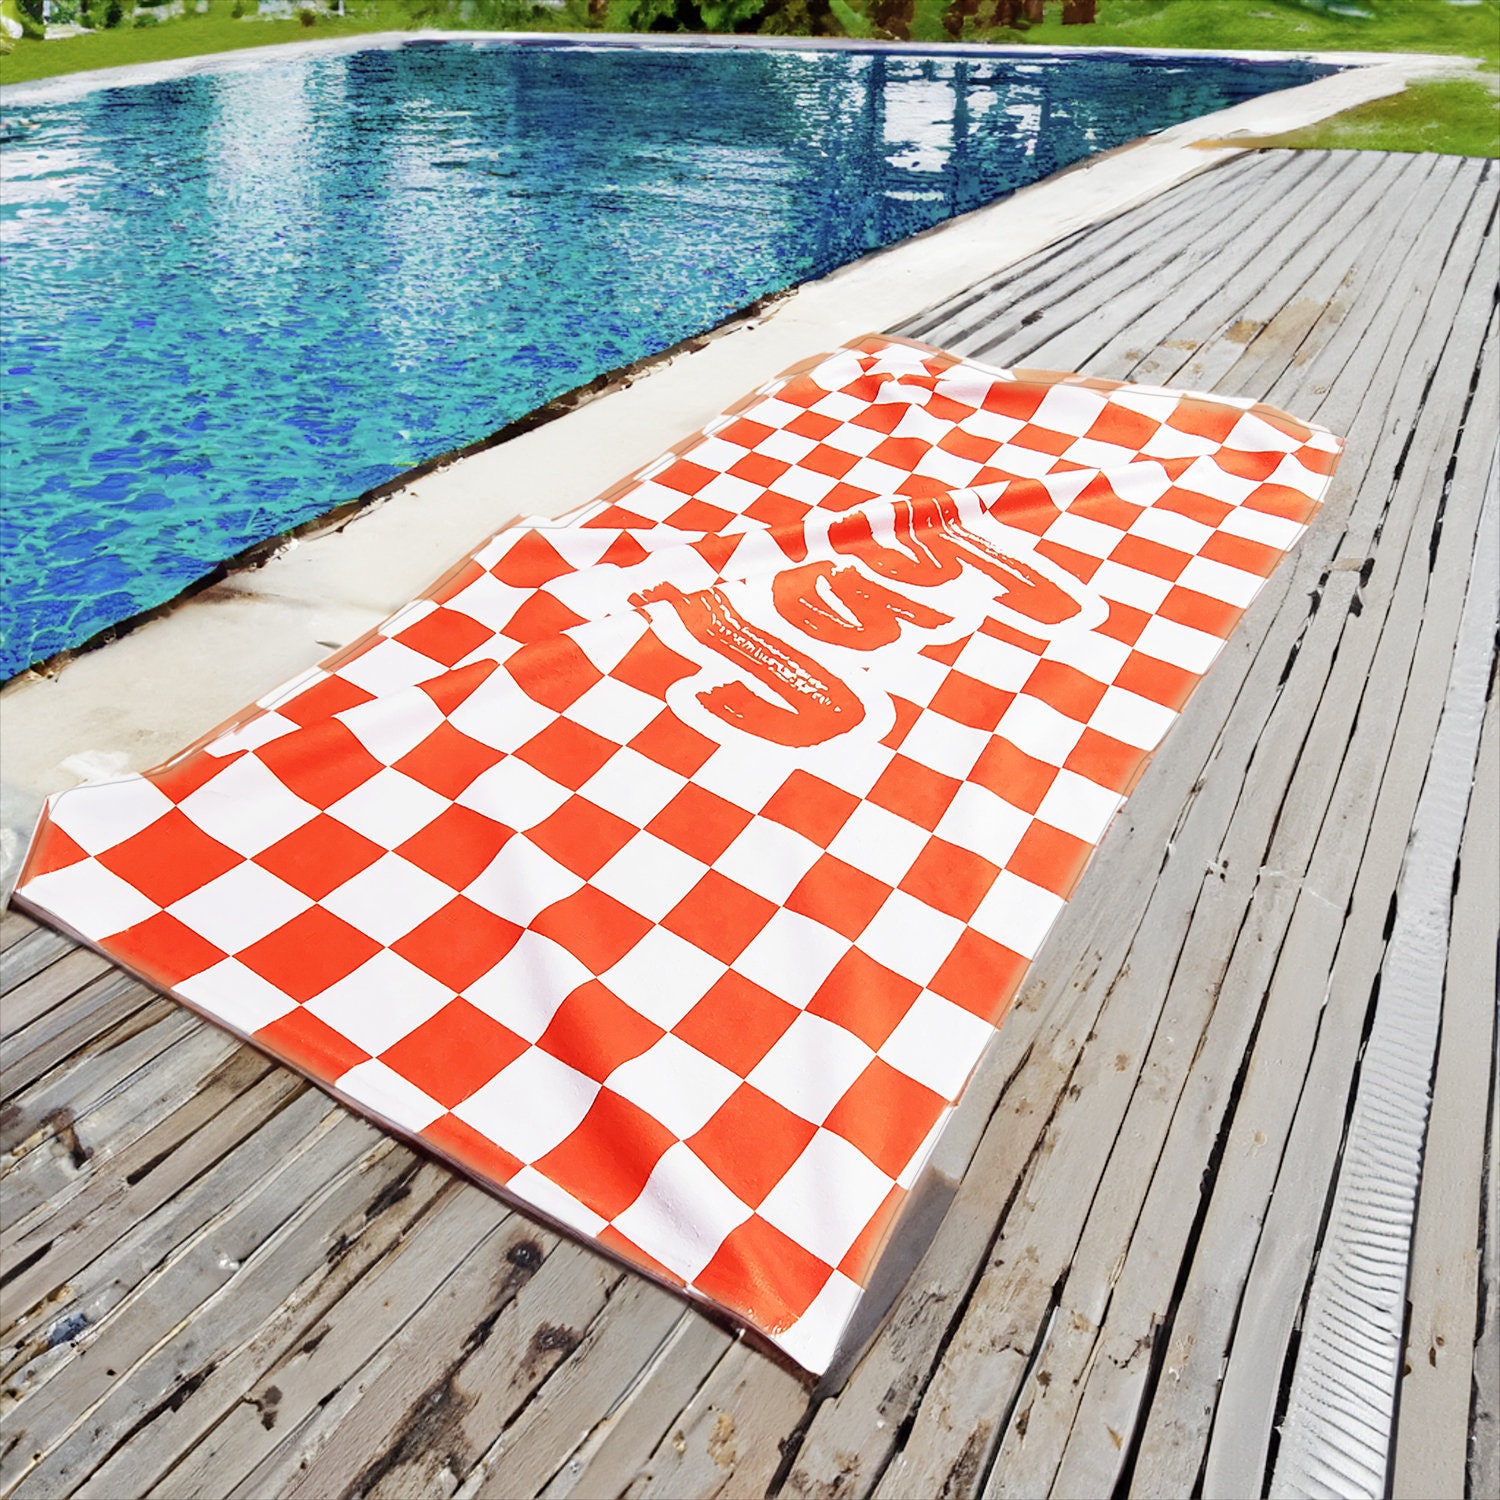 LVacation Beach Towel S00 - Women - LV By The Pool